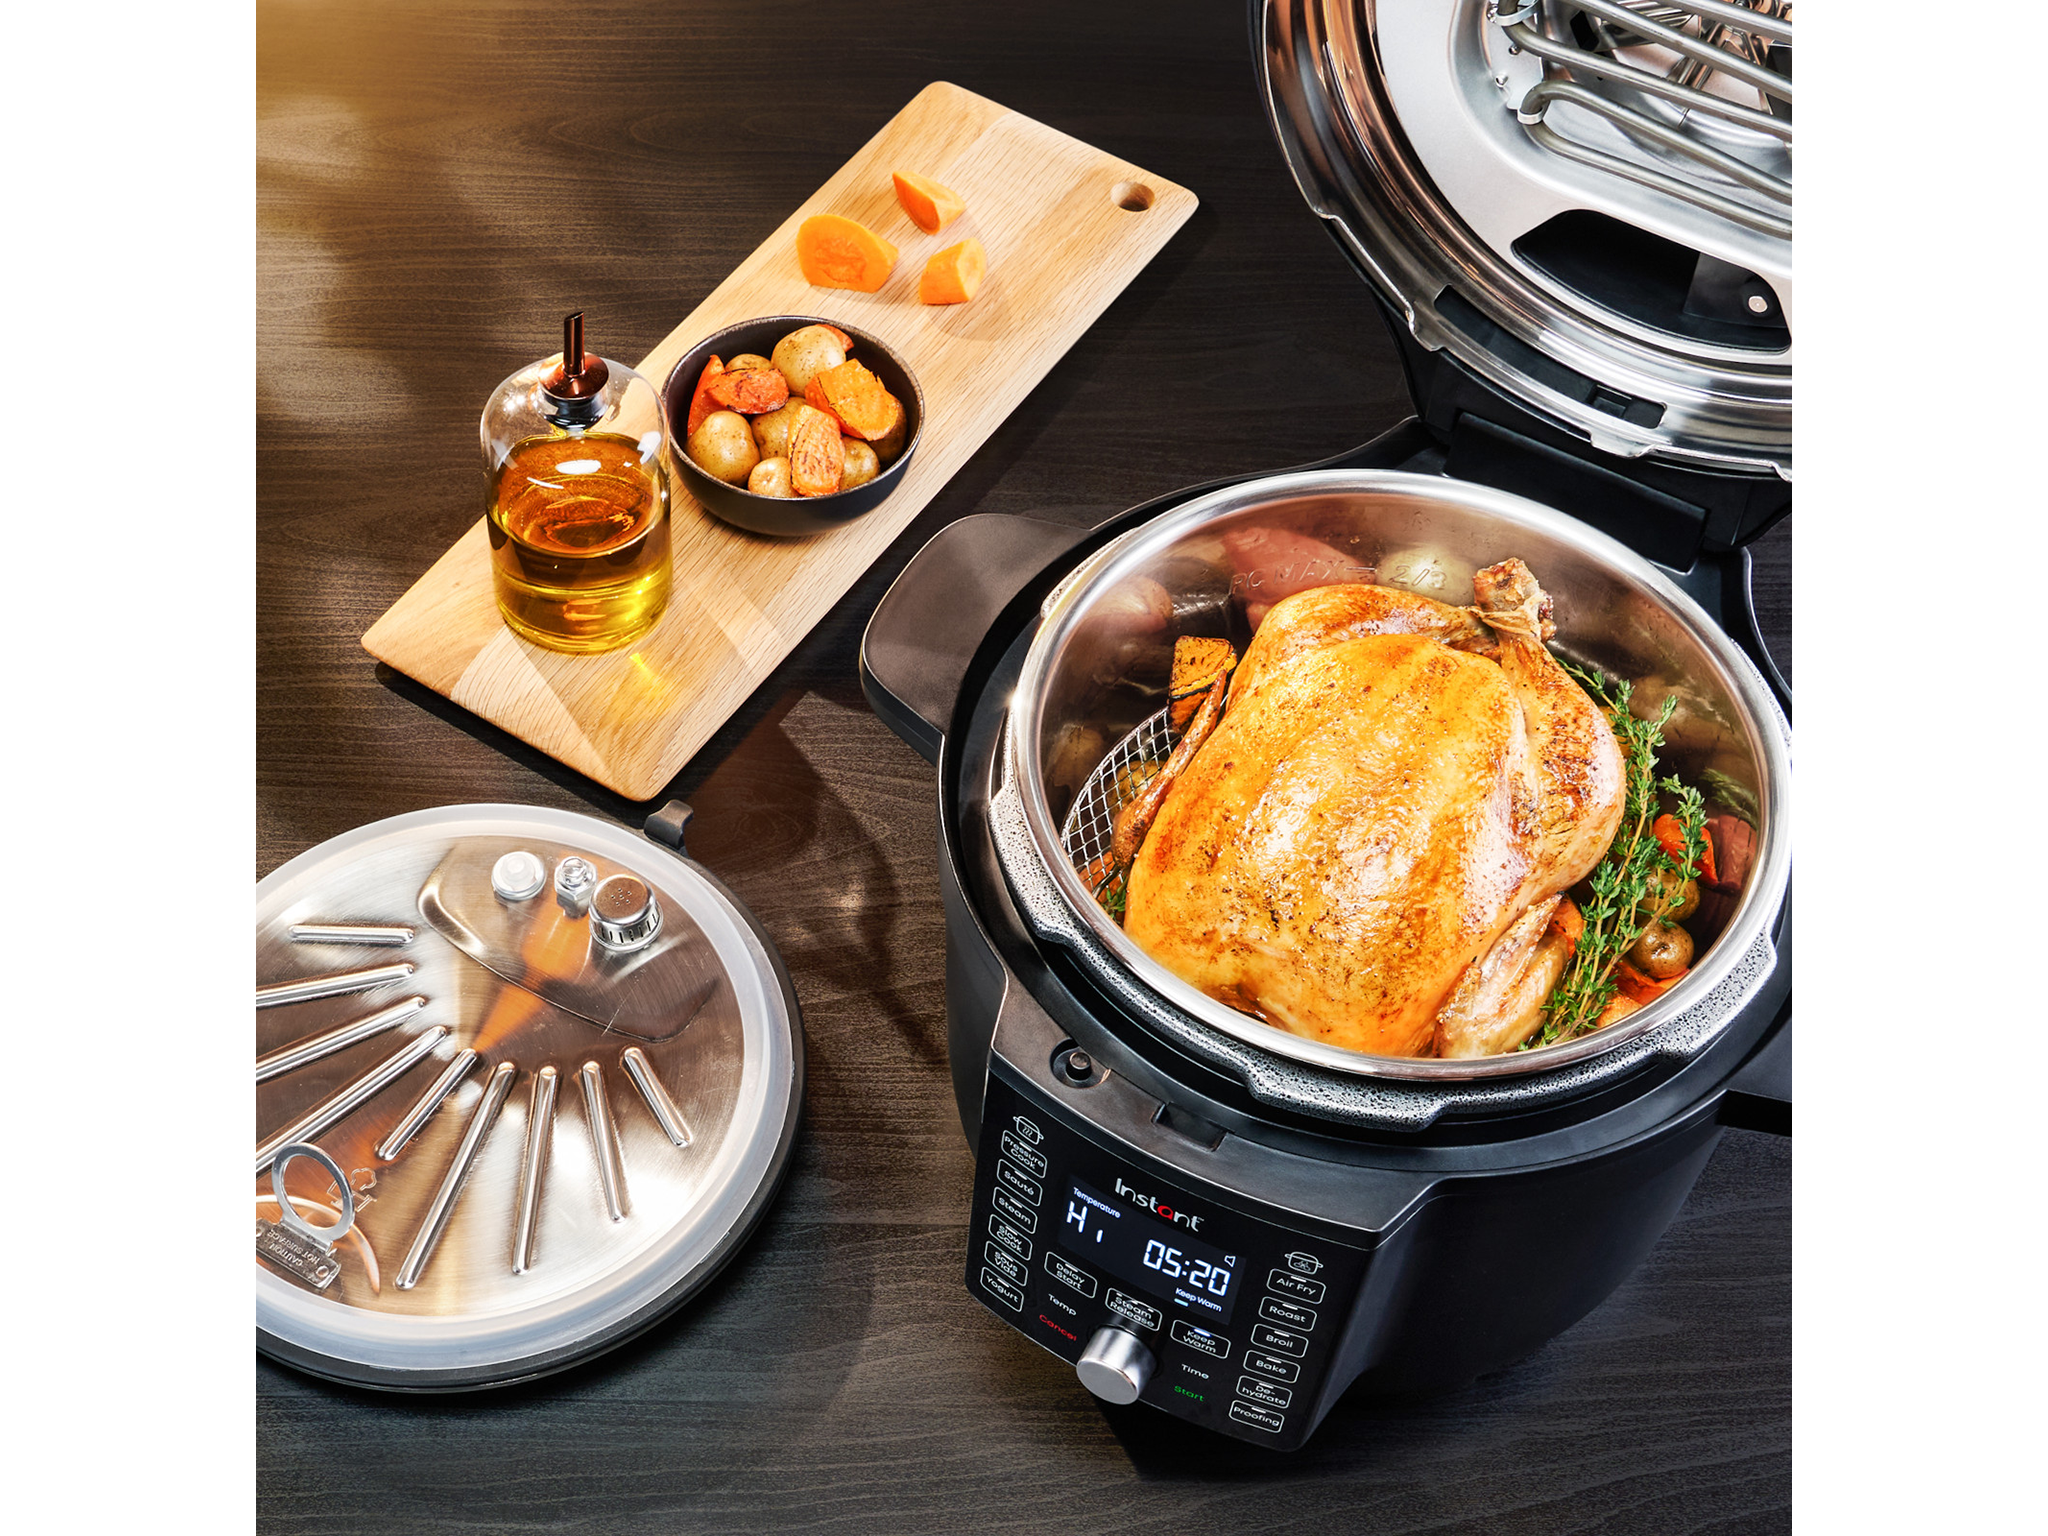 How do I assemble the multi-level air fryer basket for Instant Pot Duo  Crisp 11-in-1 Air Fryer and Electric Pressure Cooker Combo?